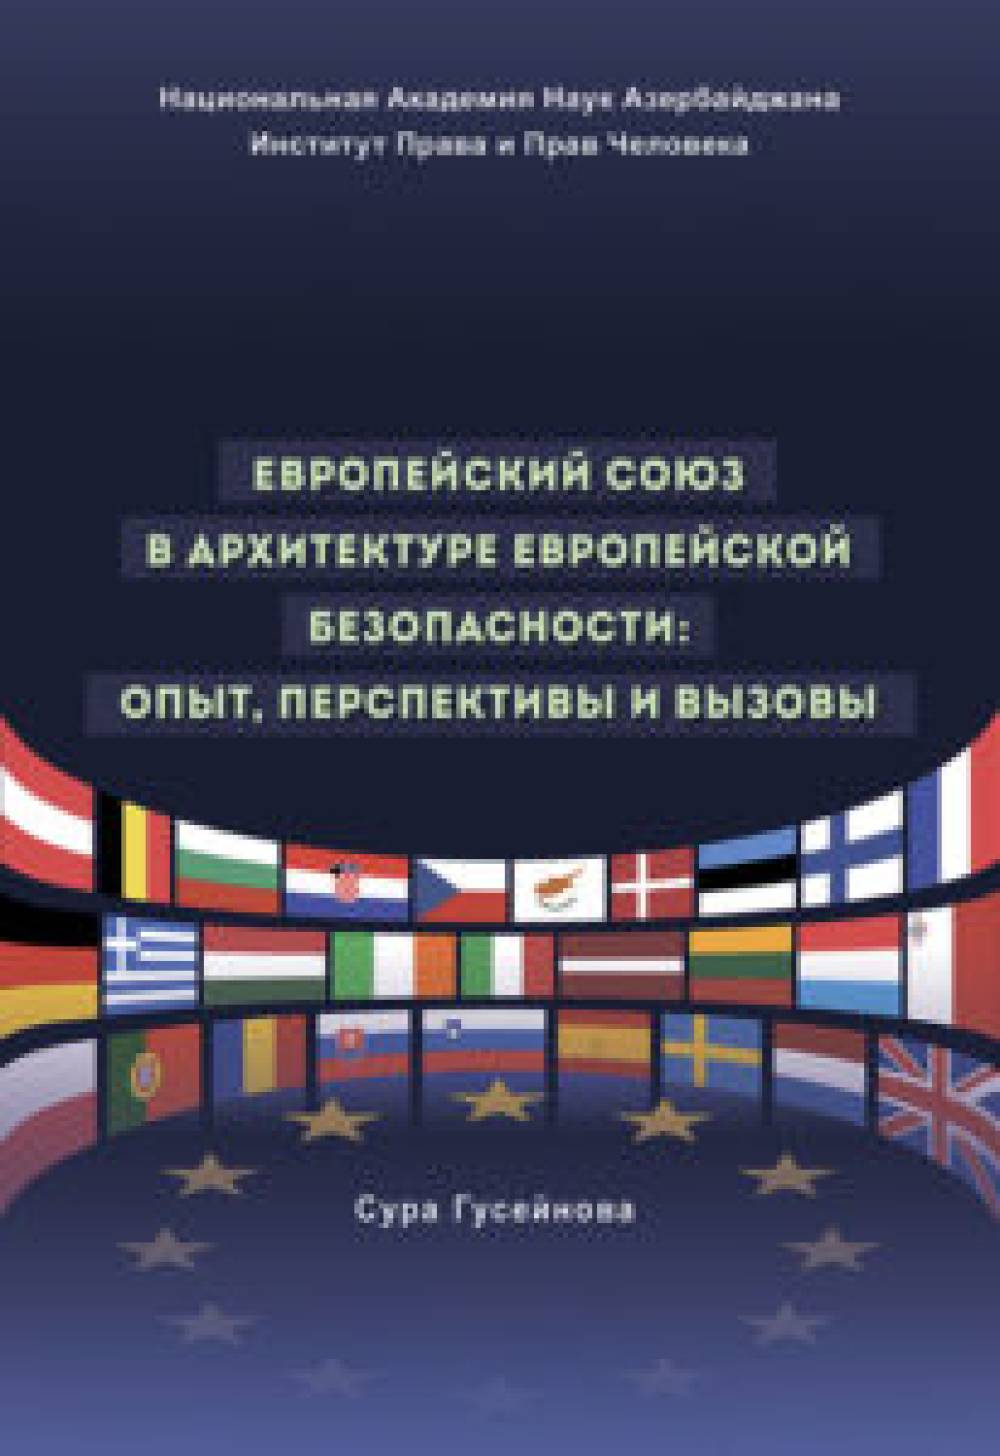 Sura Huseynova; European Union in the architecture of European security: experience, prospects and challenges (monograph)